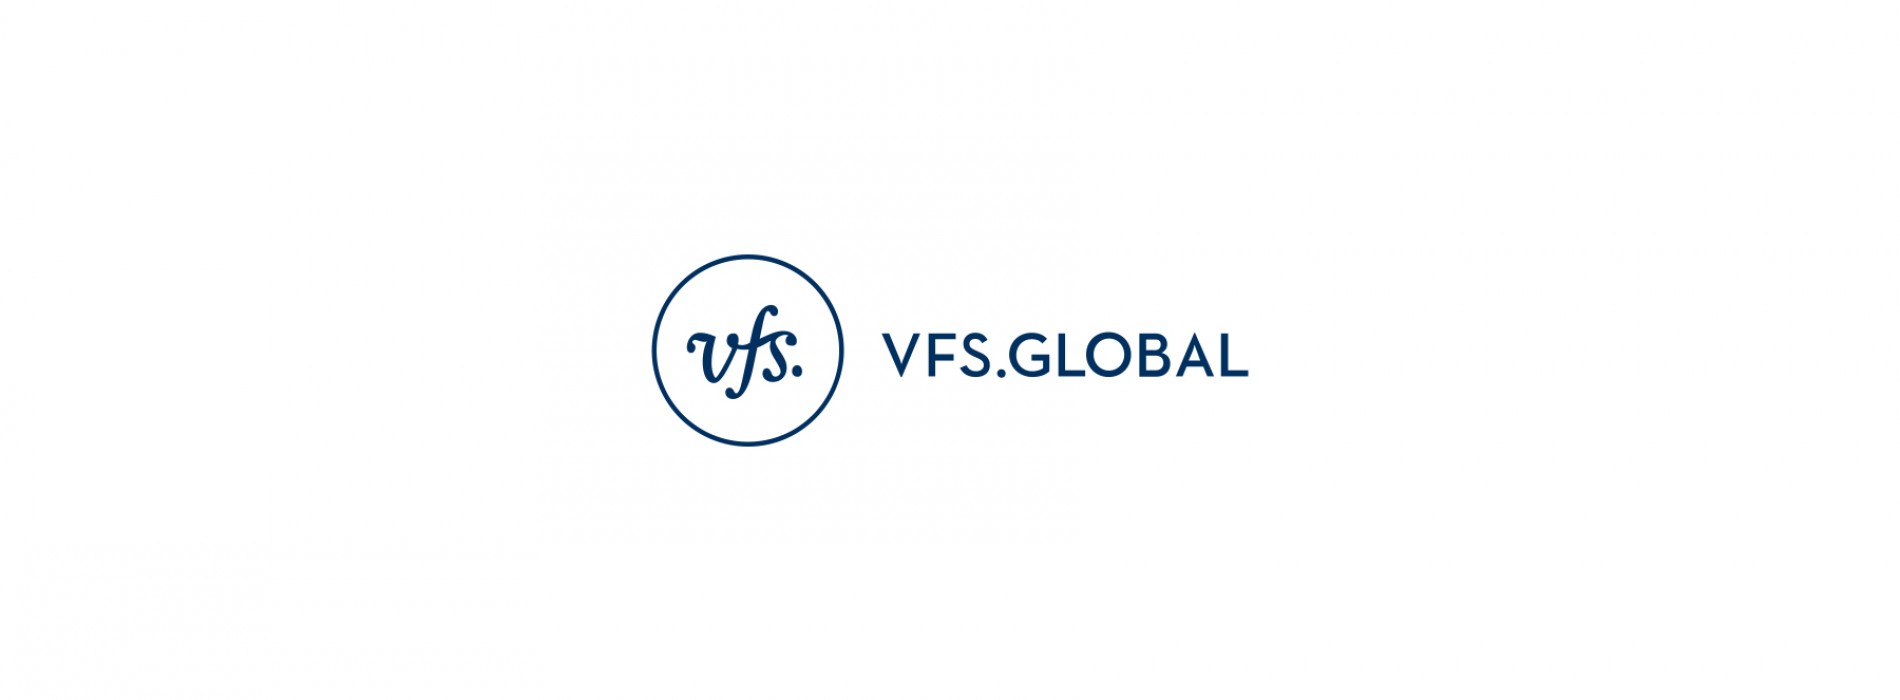 VFS Global appointed to deliver UK Government visa and passport services across 142 countries